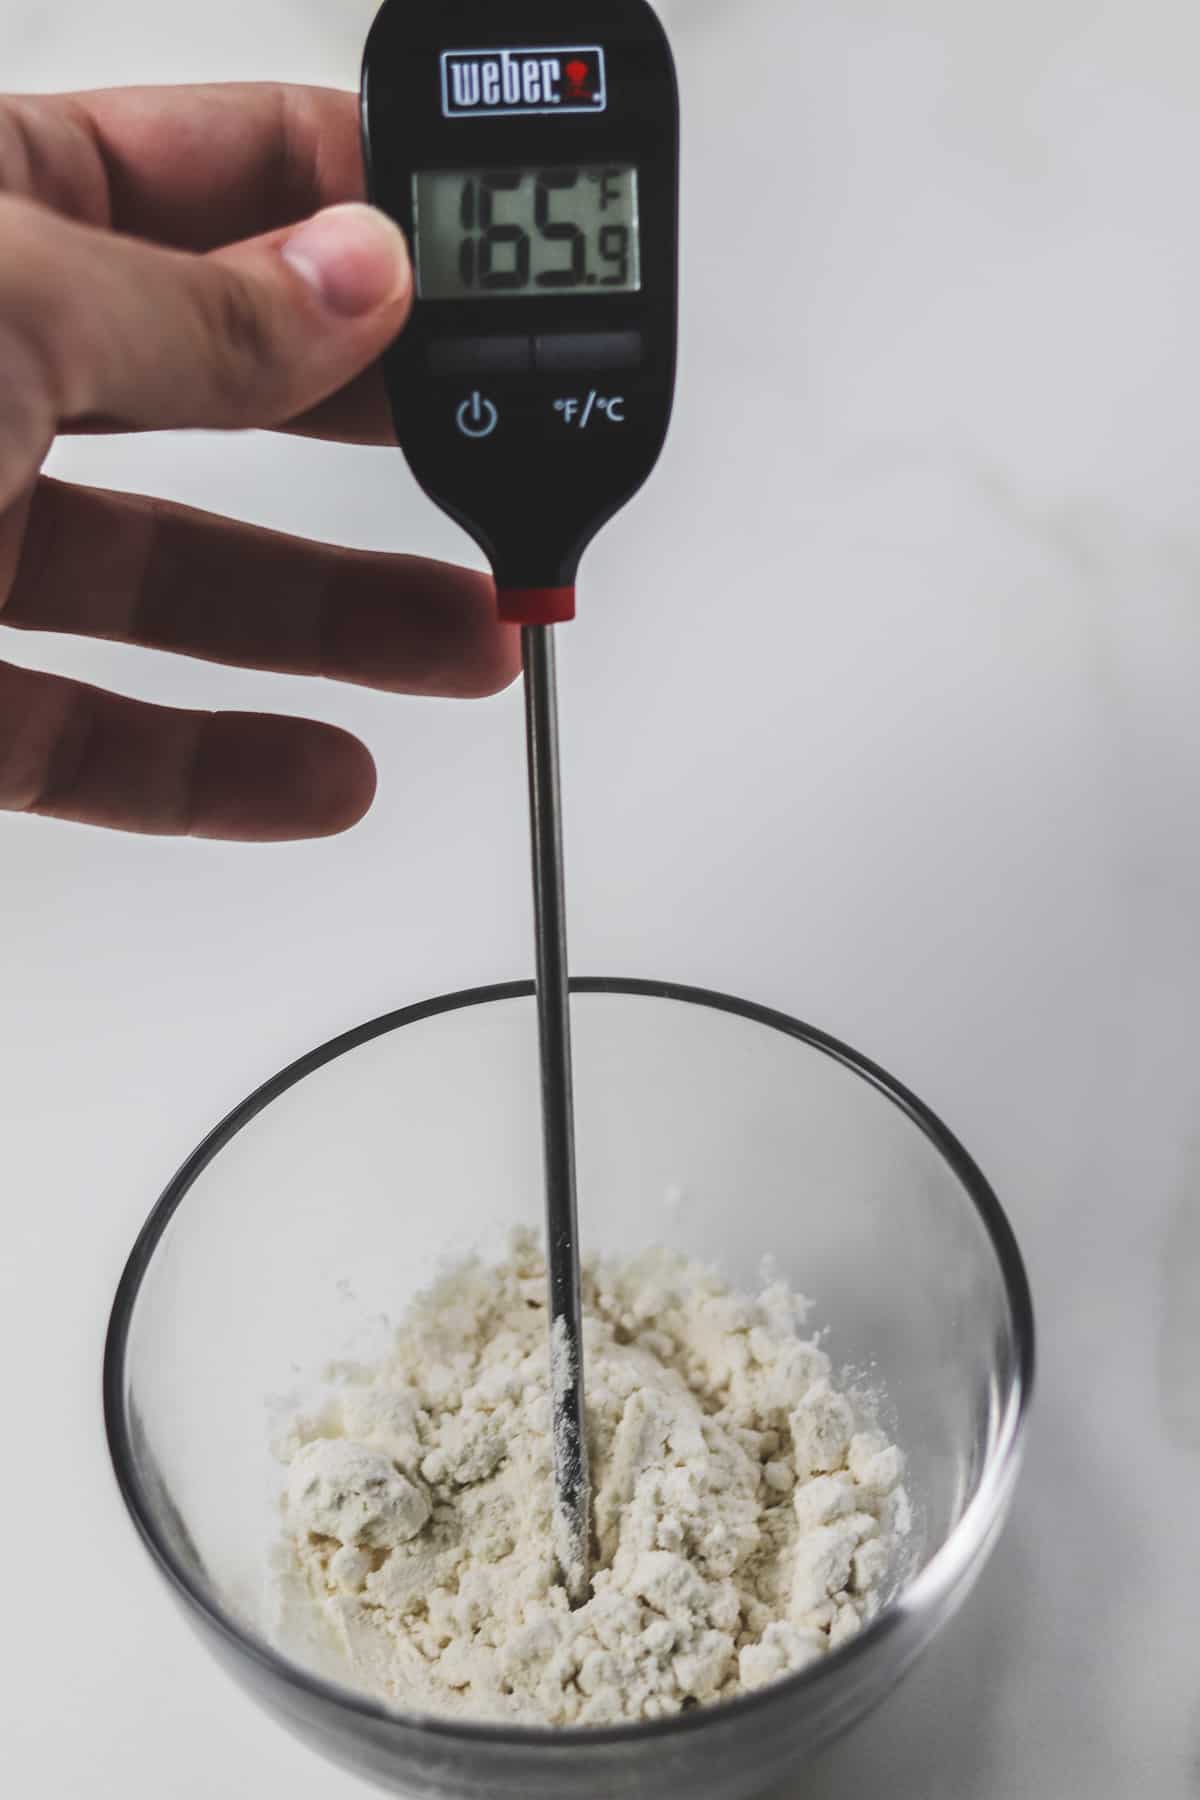 measuring the temperature of flour using a meat thermometer